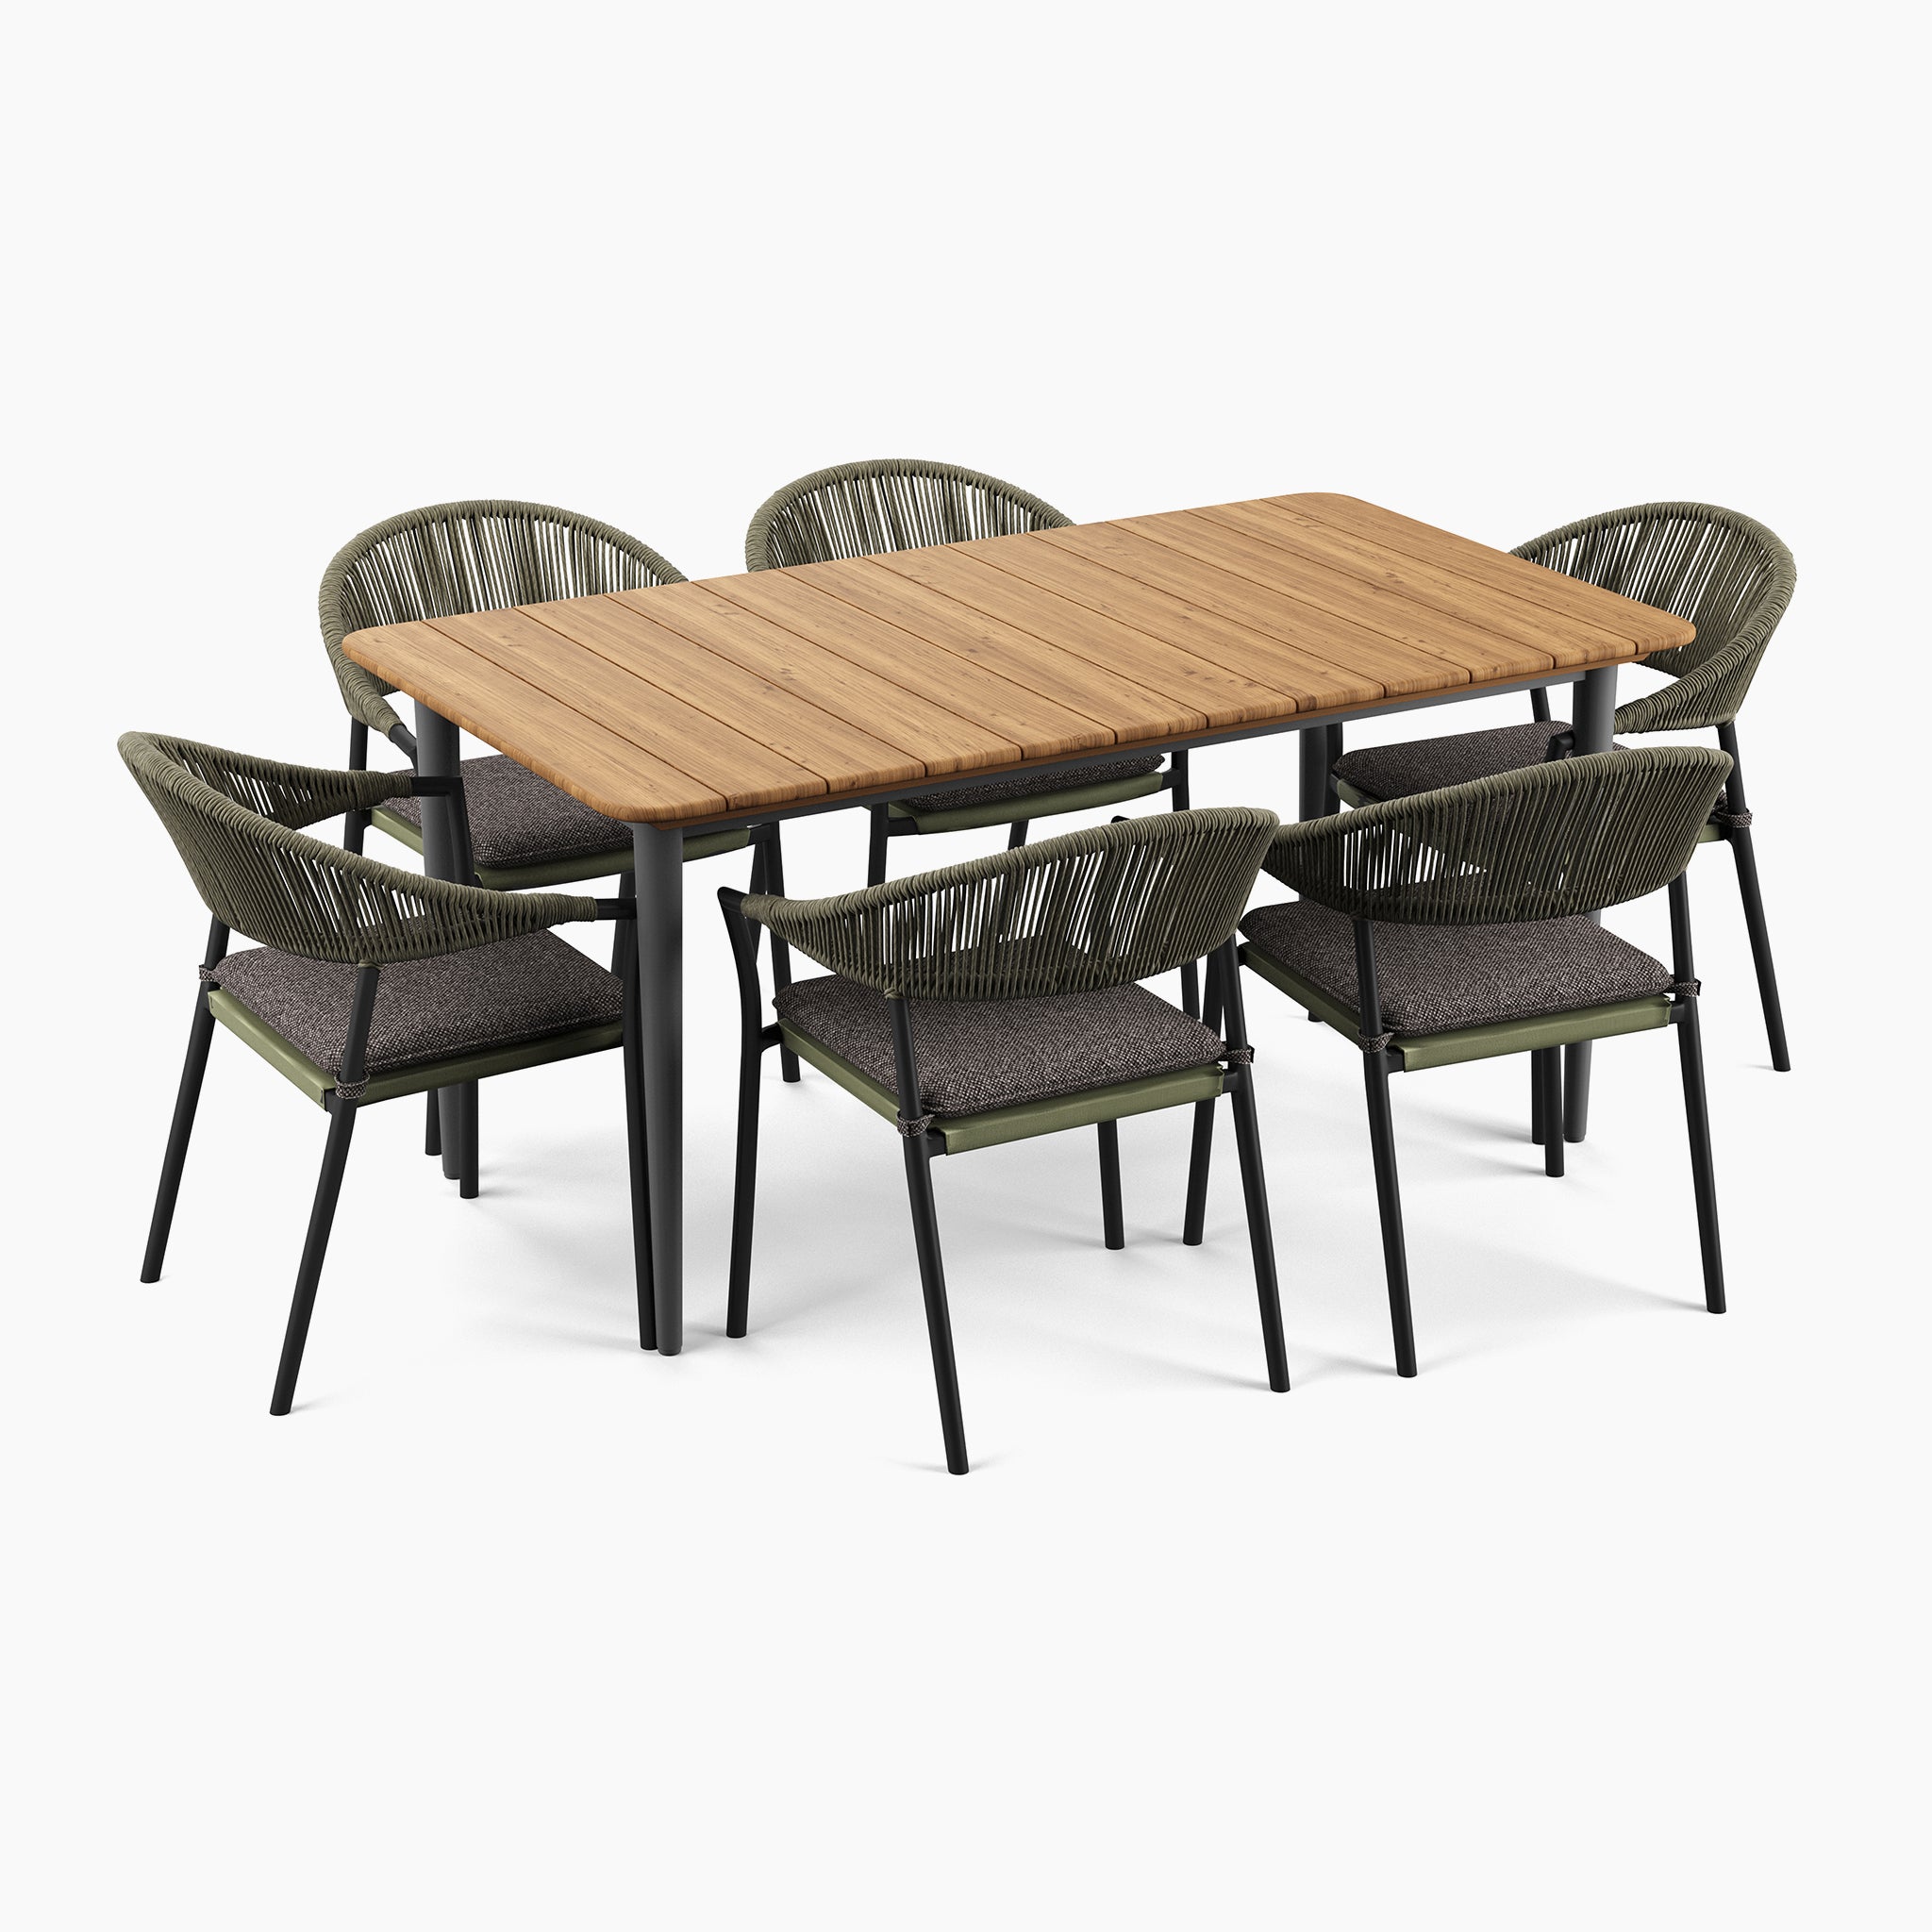 Cloverly 6 Seat Rectangular Dining with Teak Table in Green